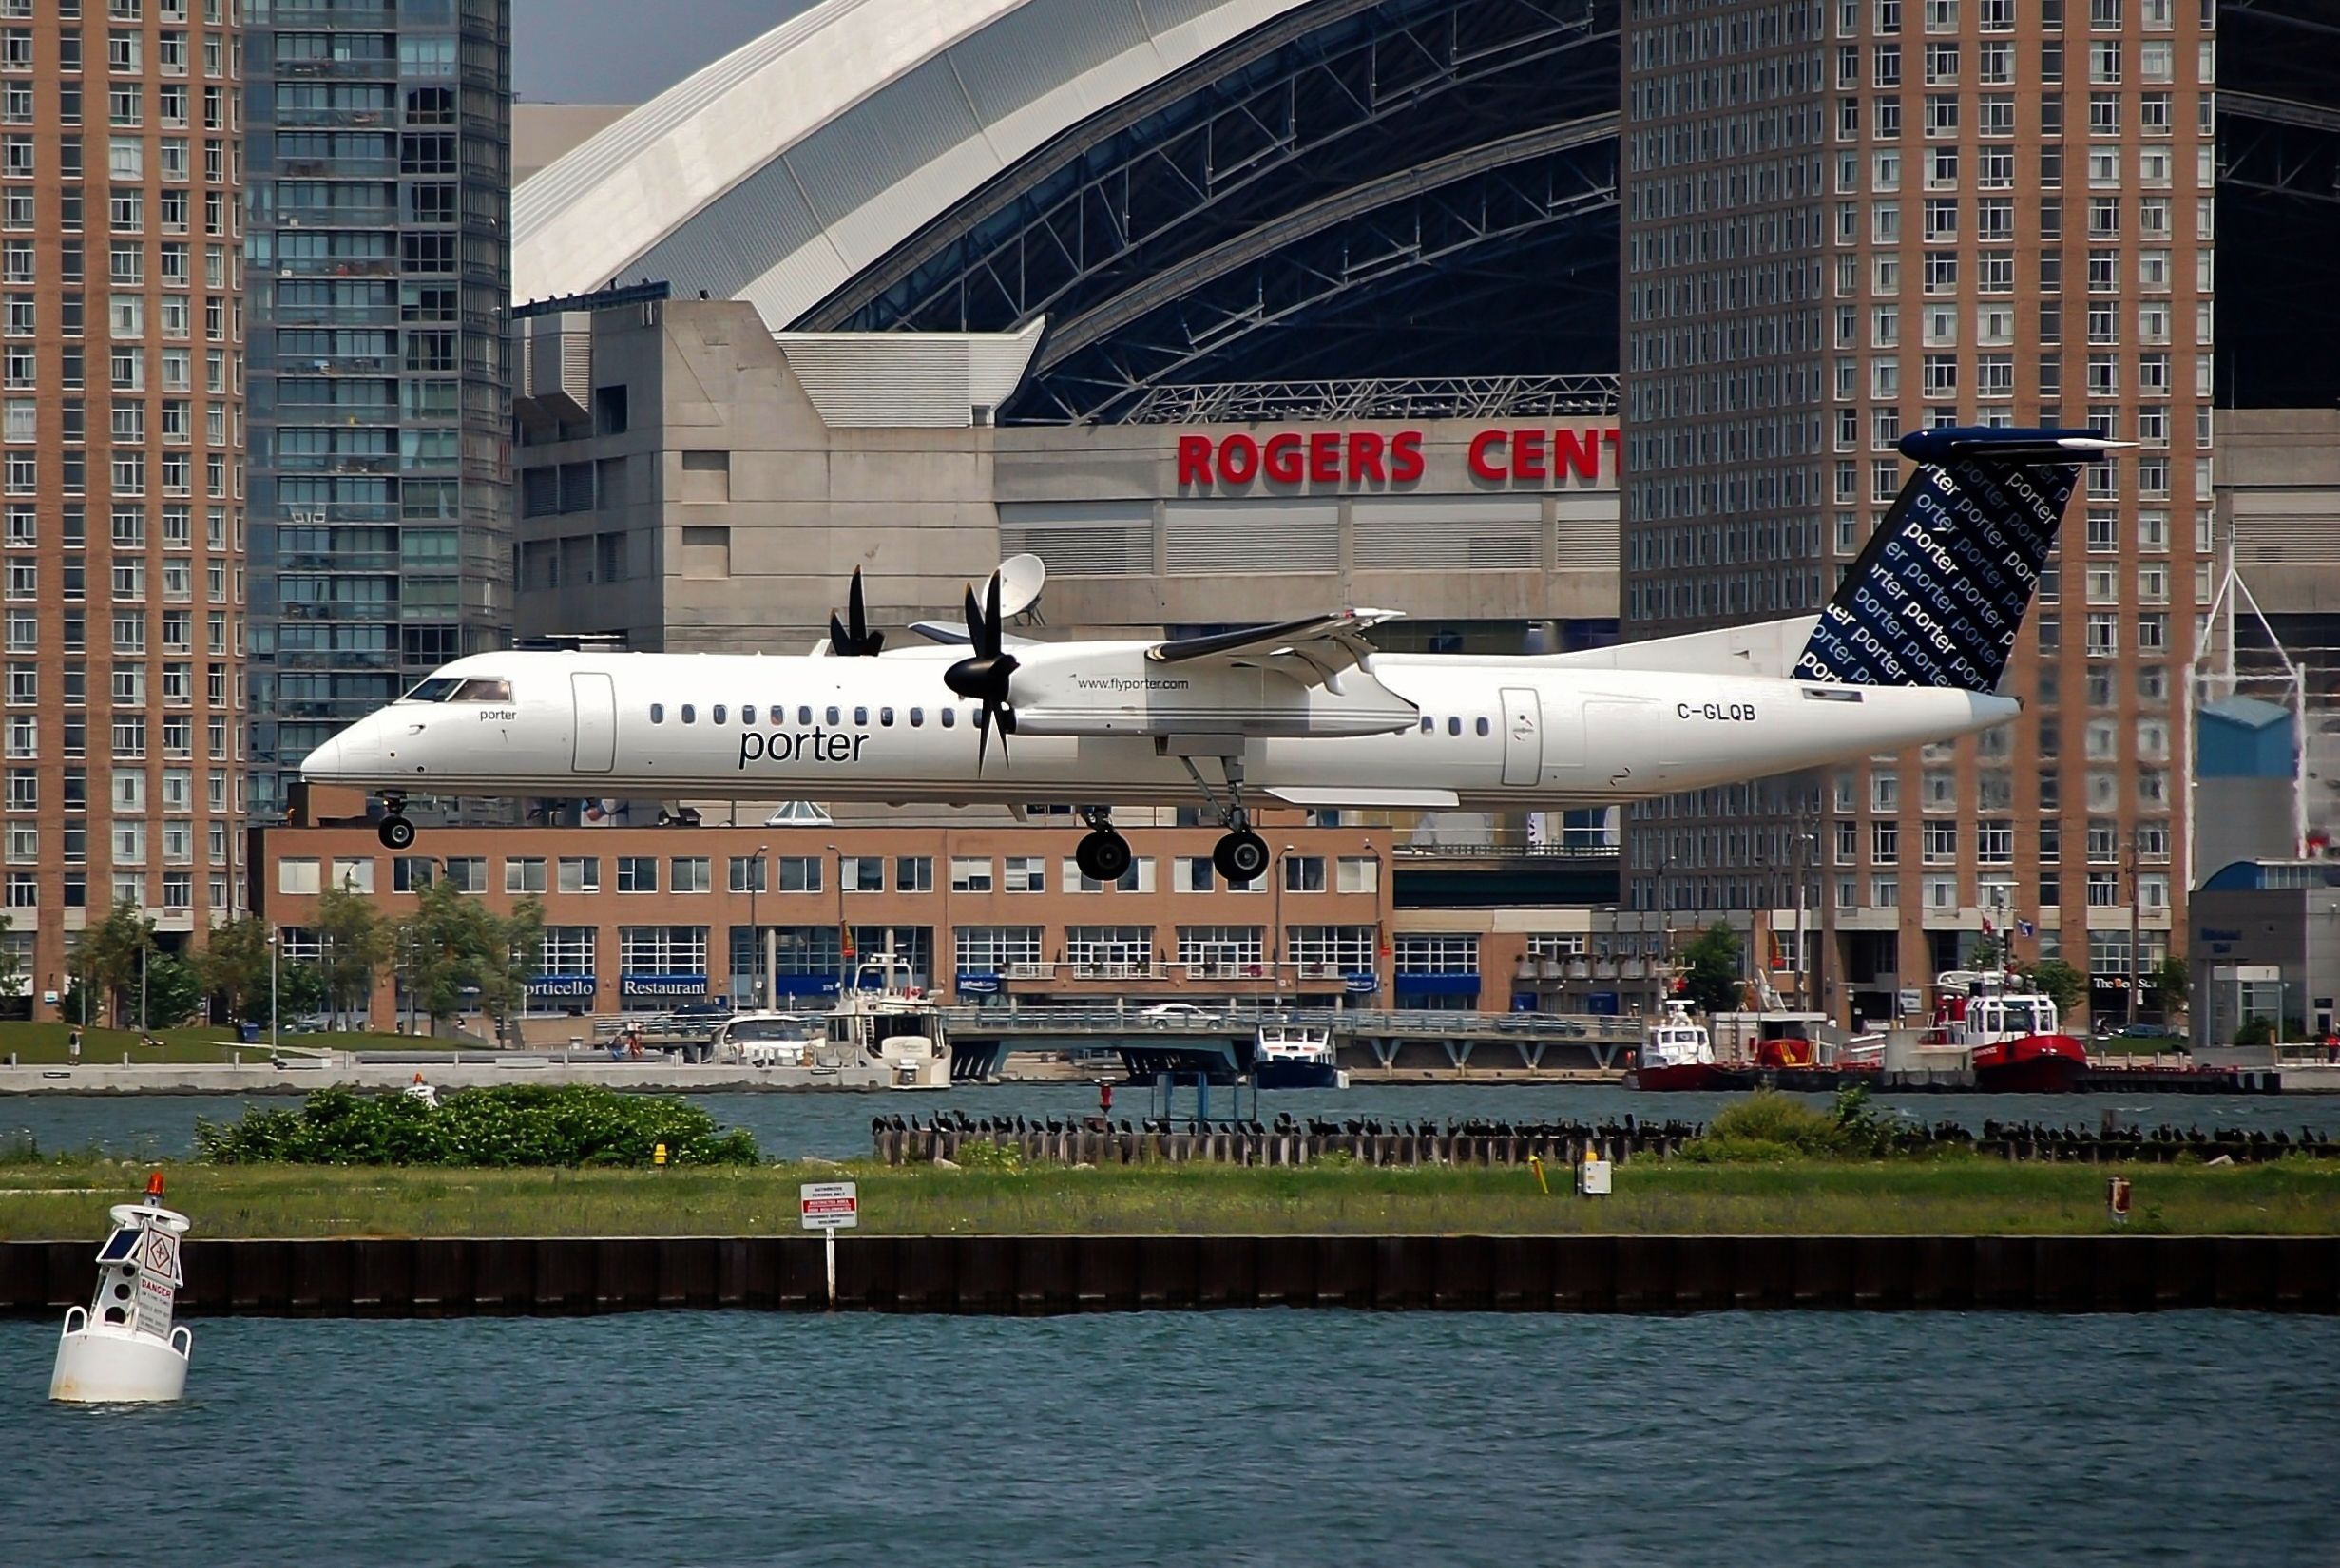 shutterstock_1489379777 - Porter Airlines Bombardier DHC-8-402 Q400, Registration C-GLQB landing at the Toronto Billy Bishop City (City Centre / Toronto Island airport in front of the Rogers Center. Toronto, Canada July 2 2011